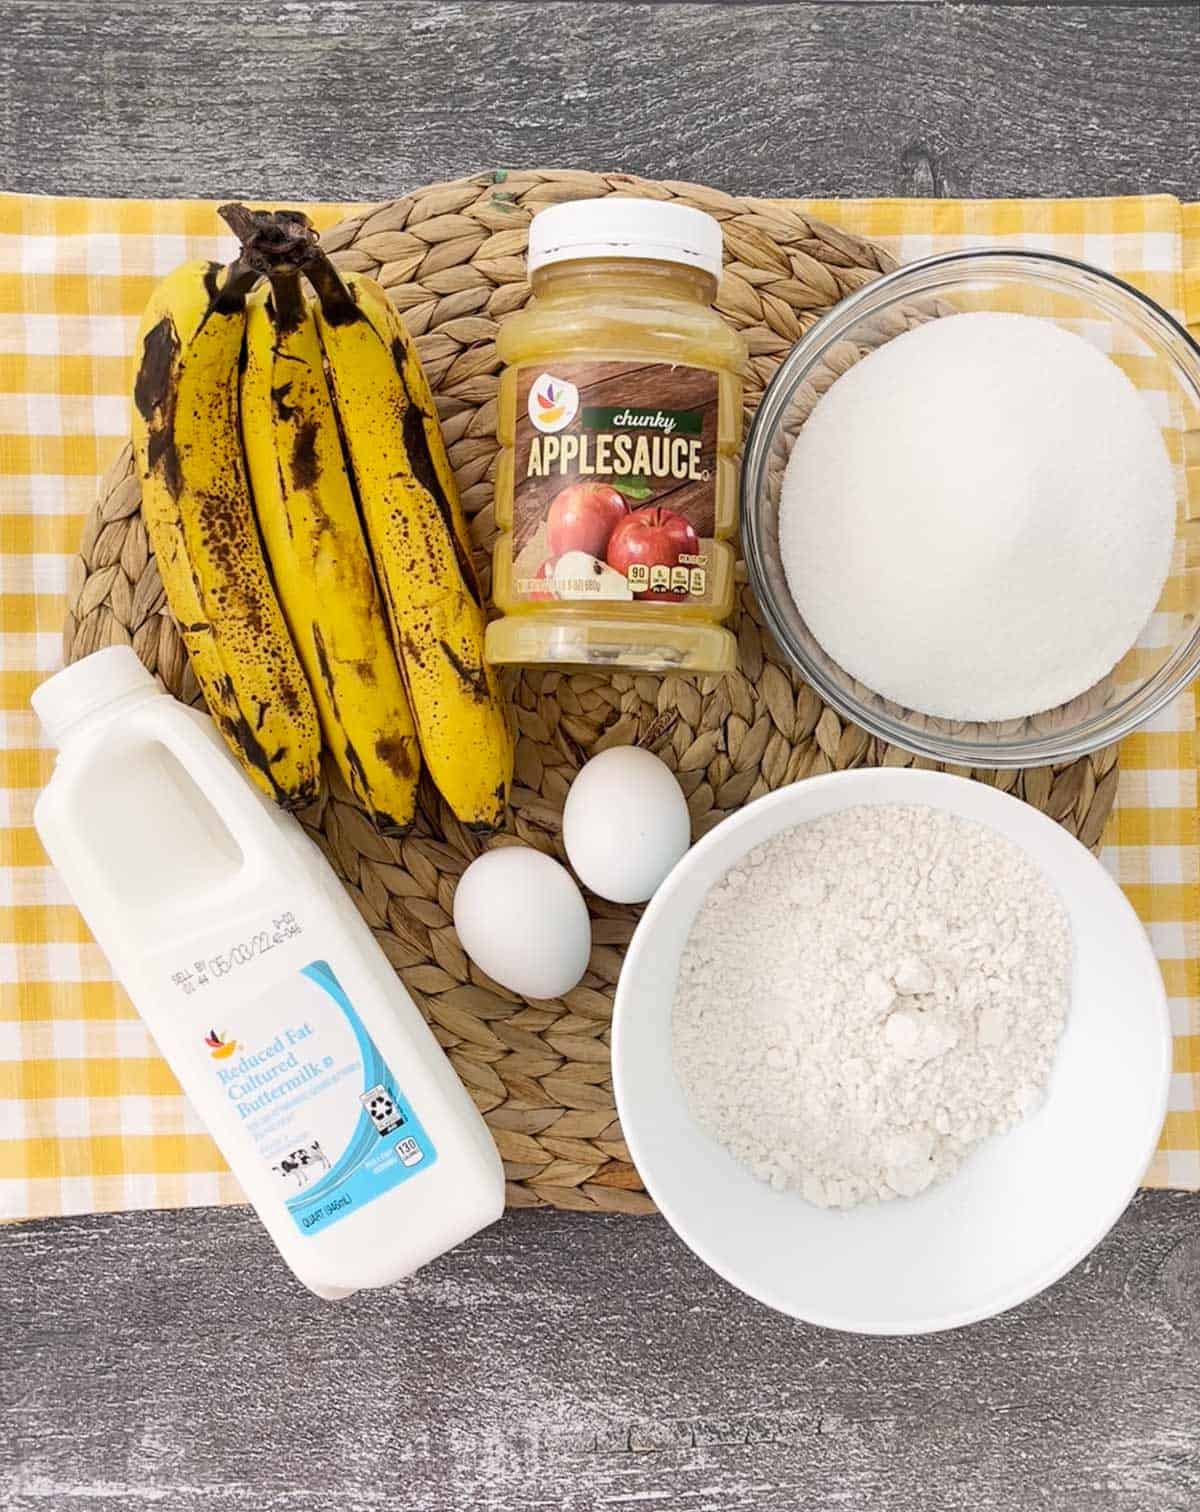 Ingredients for buttermilk banana bread on a yellow placemat.